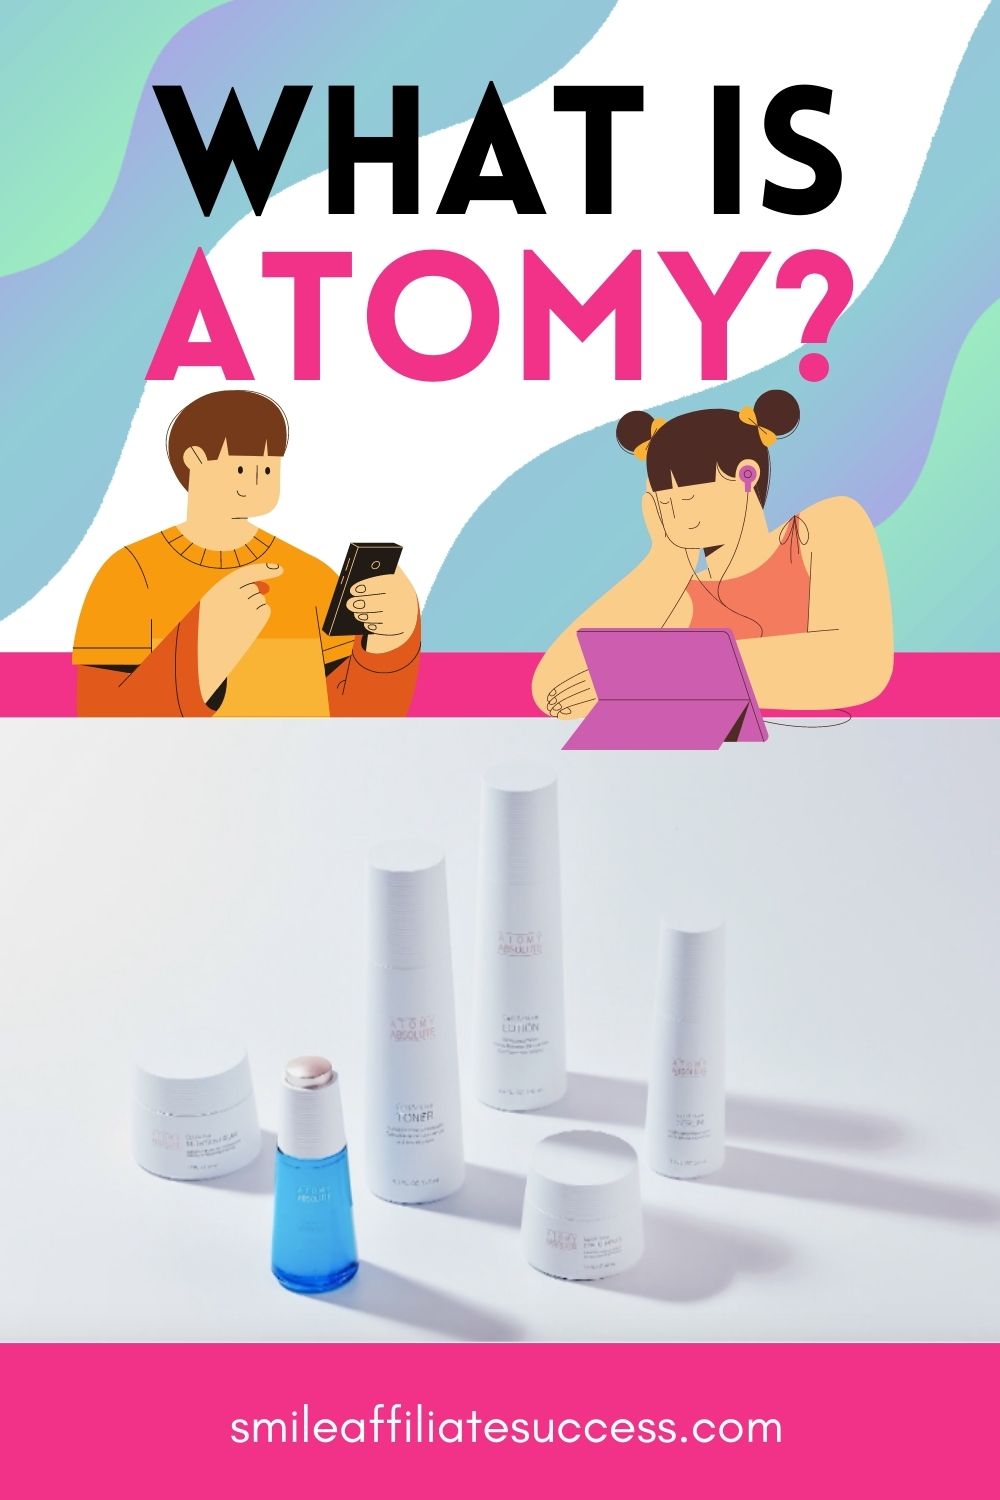 What Is Atomy?